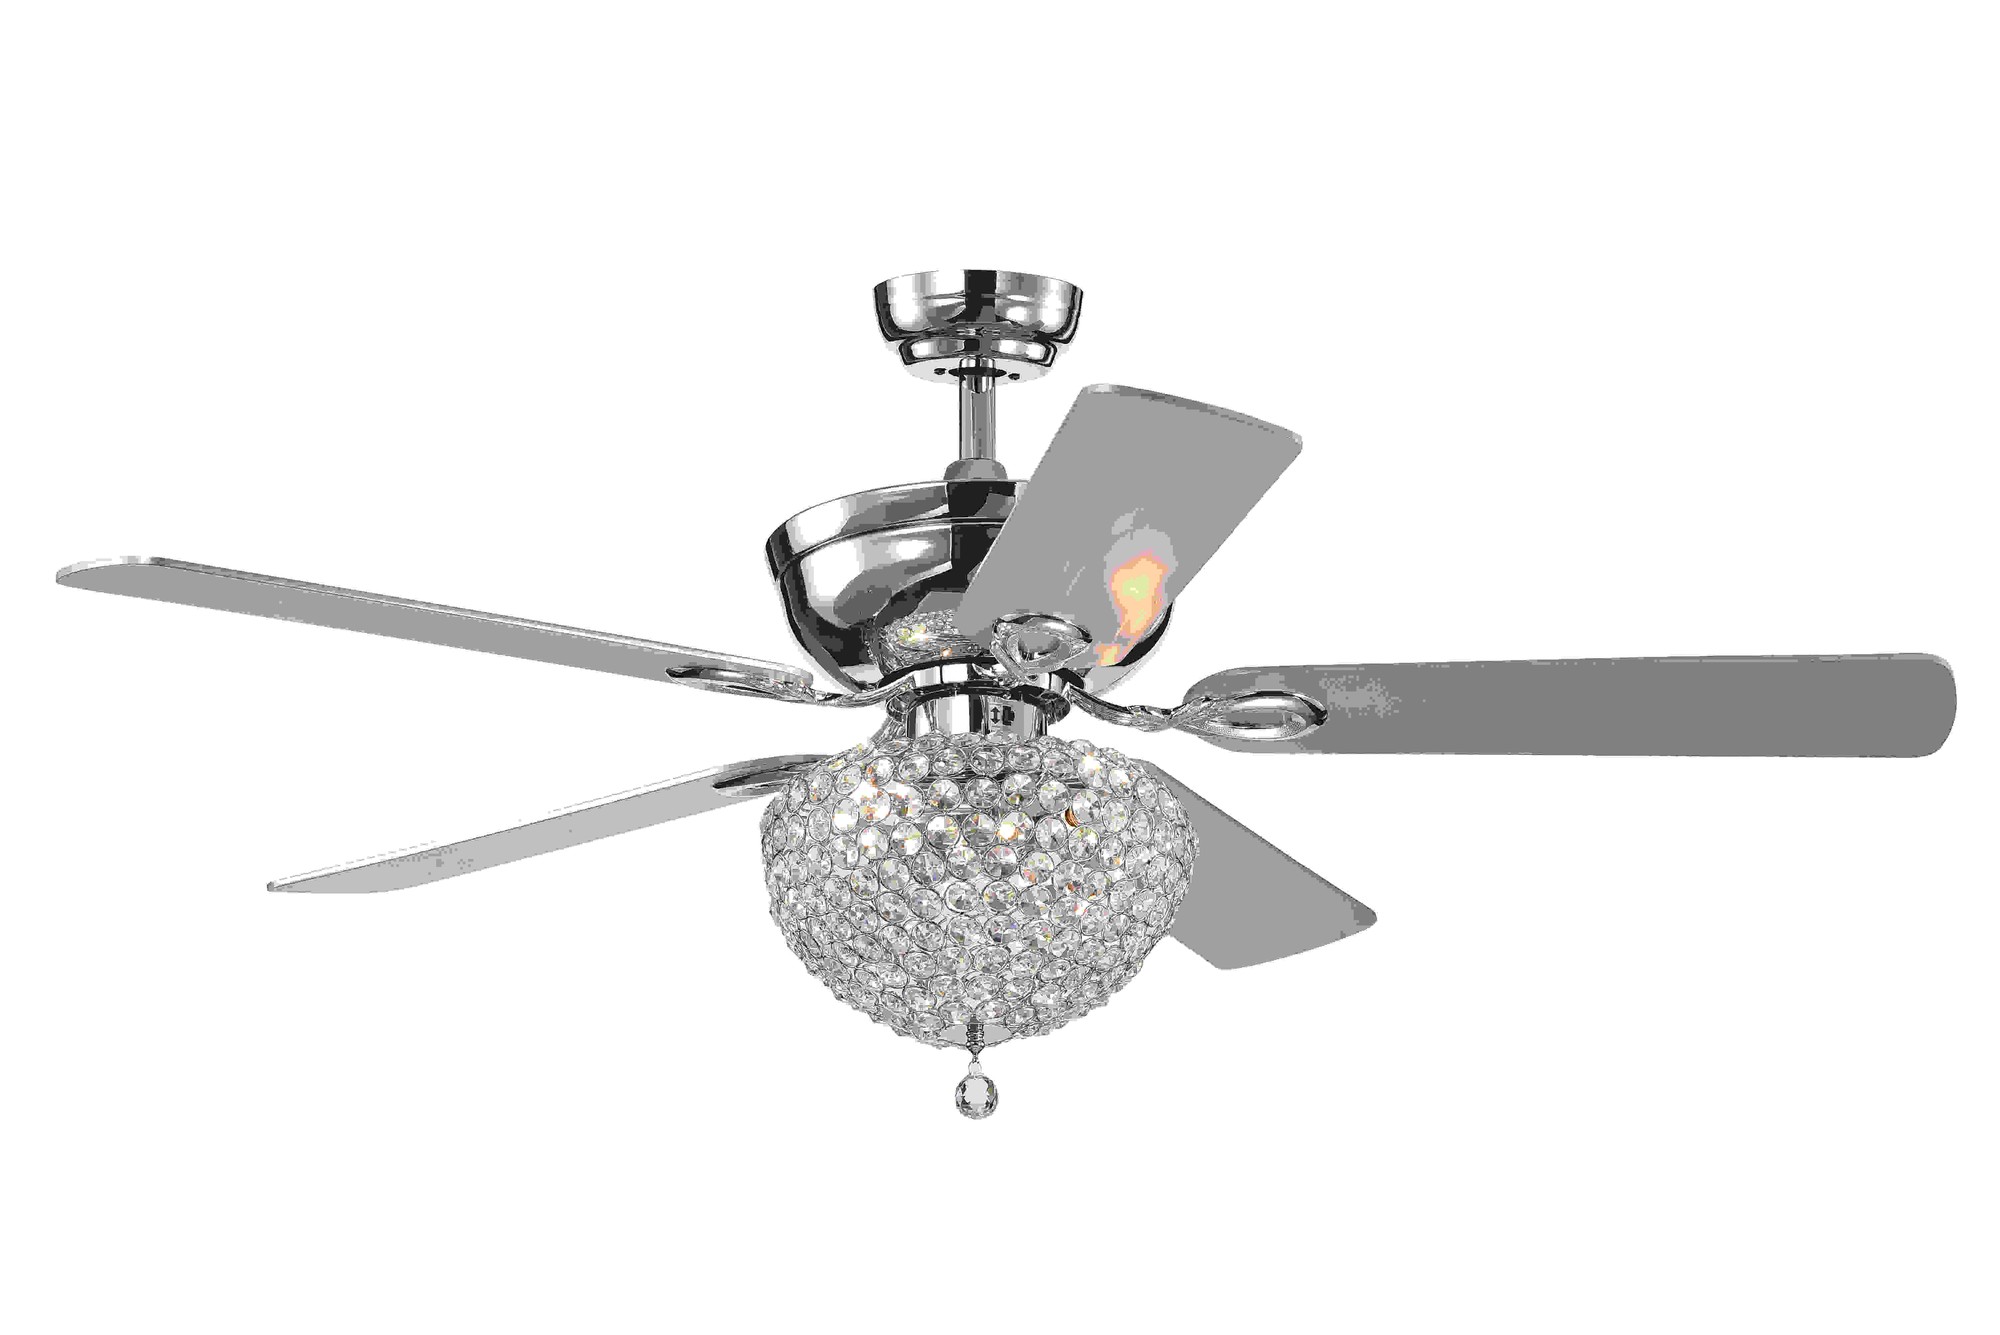 Swarna Chrome 5-blade 52-inch Lighted Ceiling Fan with Crystal Bowl Chandelier (Remote Controlled)